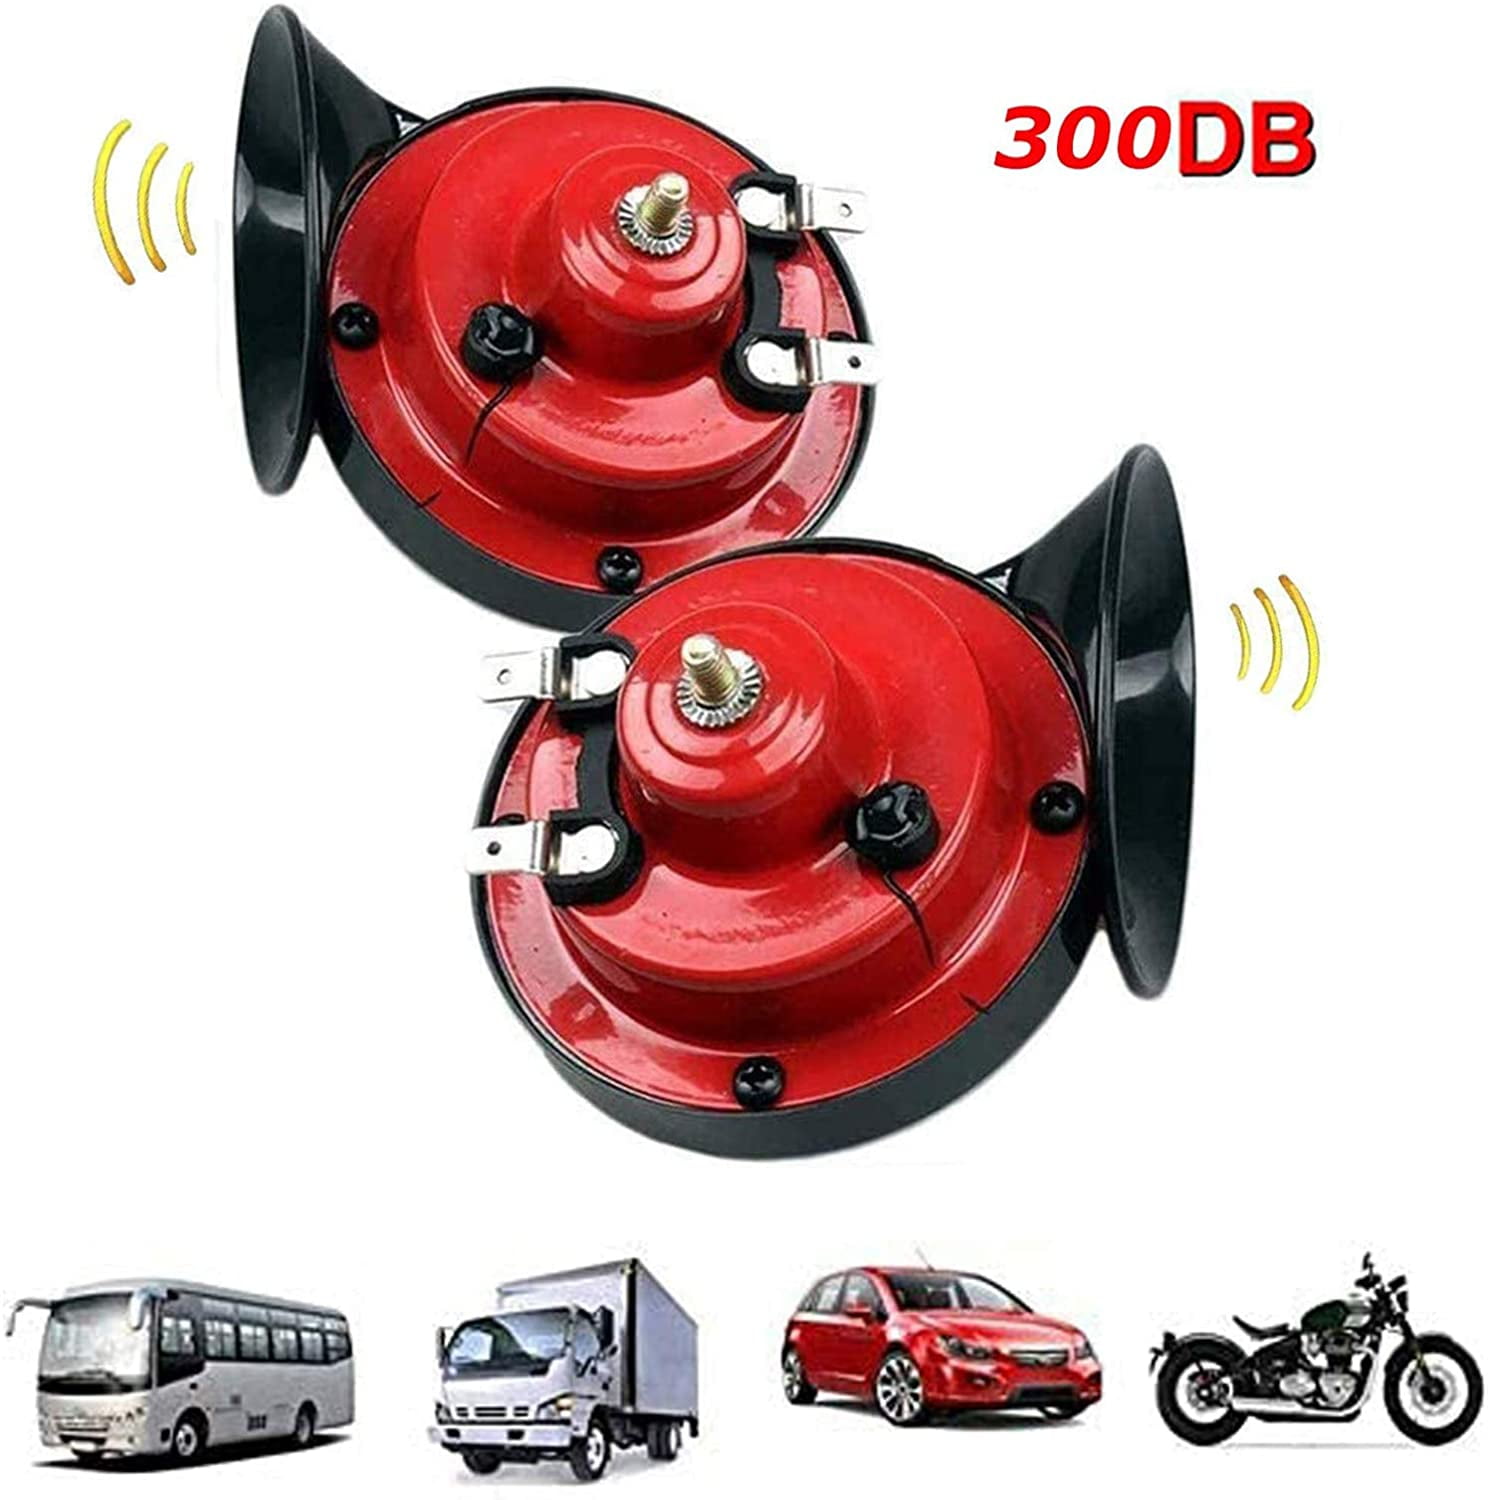 【2 Pack】 300DB Super Loud Train Horn for Truck Train Boat Car Air Electric Snail Singl0e Horn 12v Waterproof Double Horn Raging Sound Raging Sound for Car Motorcycle 